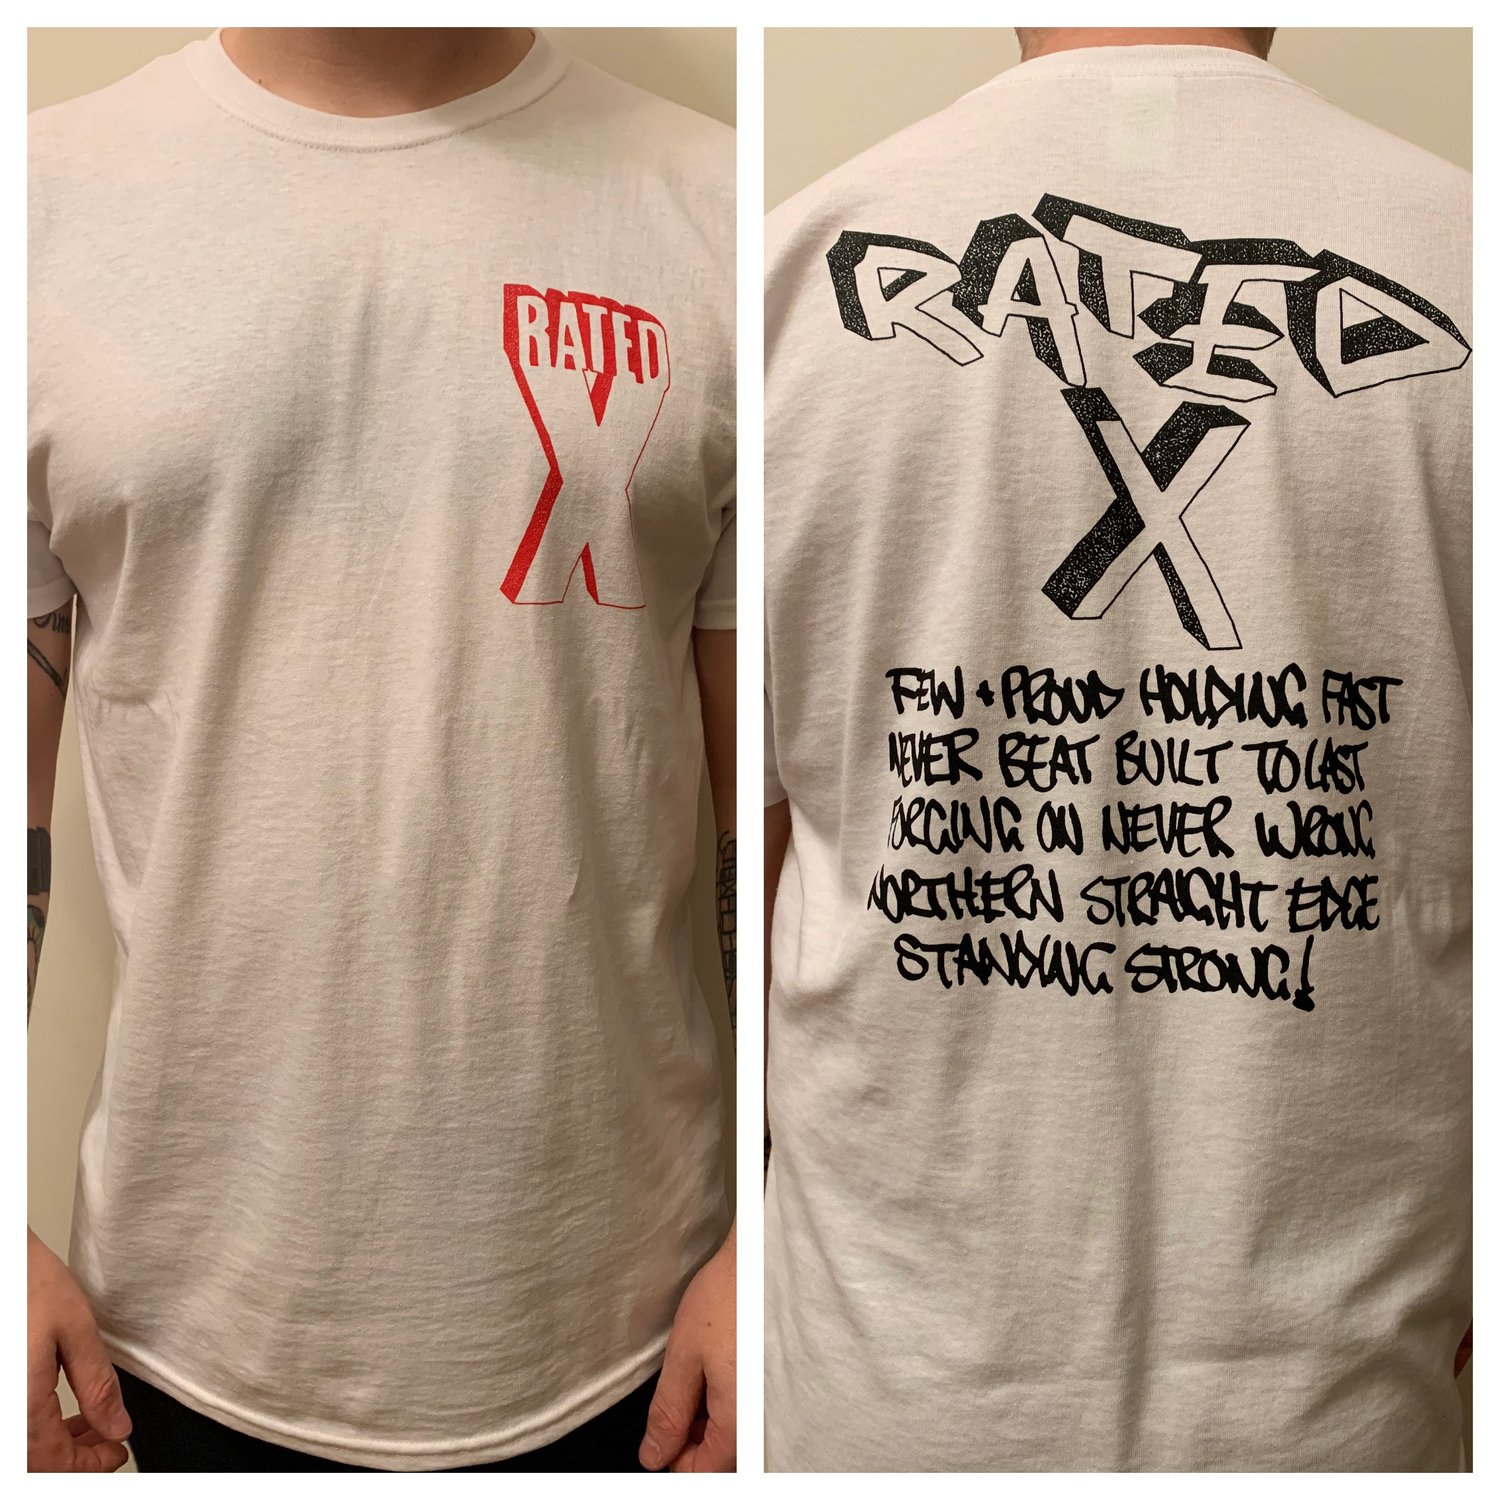 Image of RATED X shirt